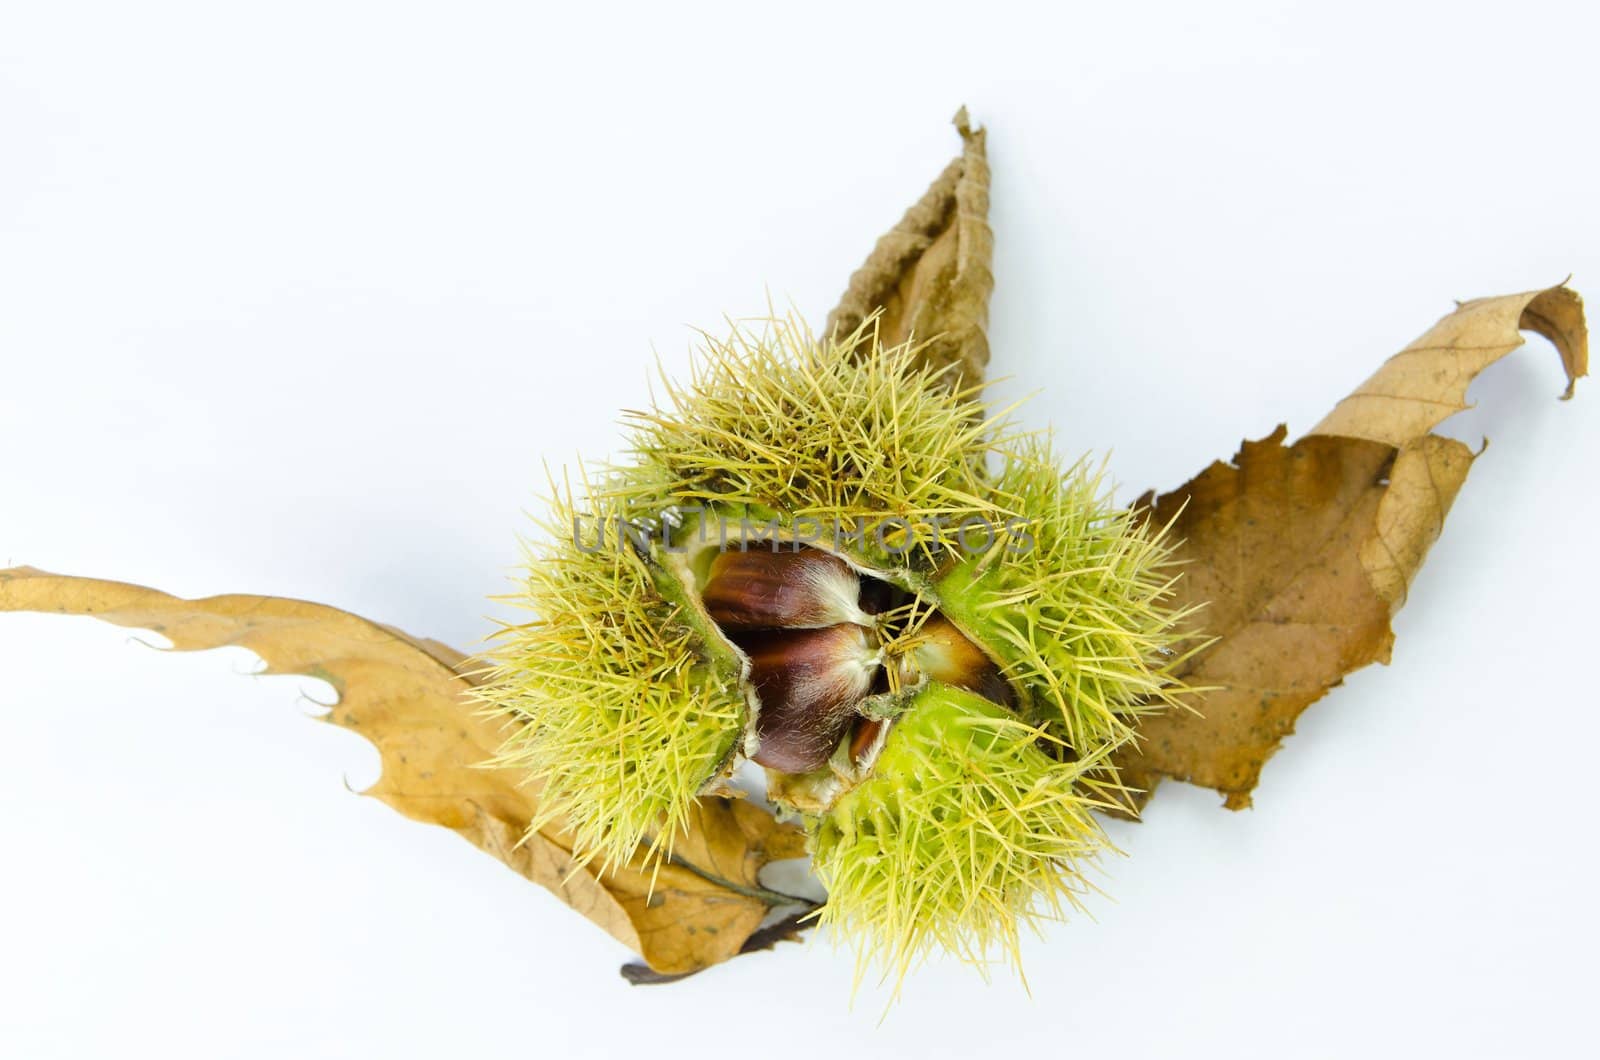 Chestnut and leaves against a white background